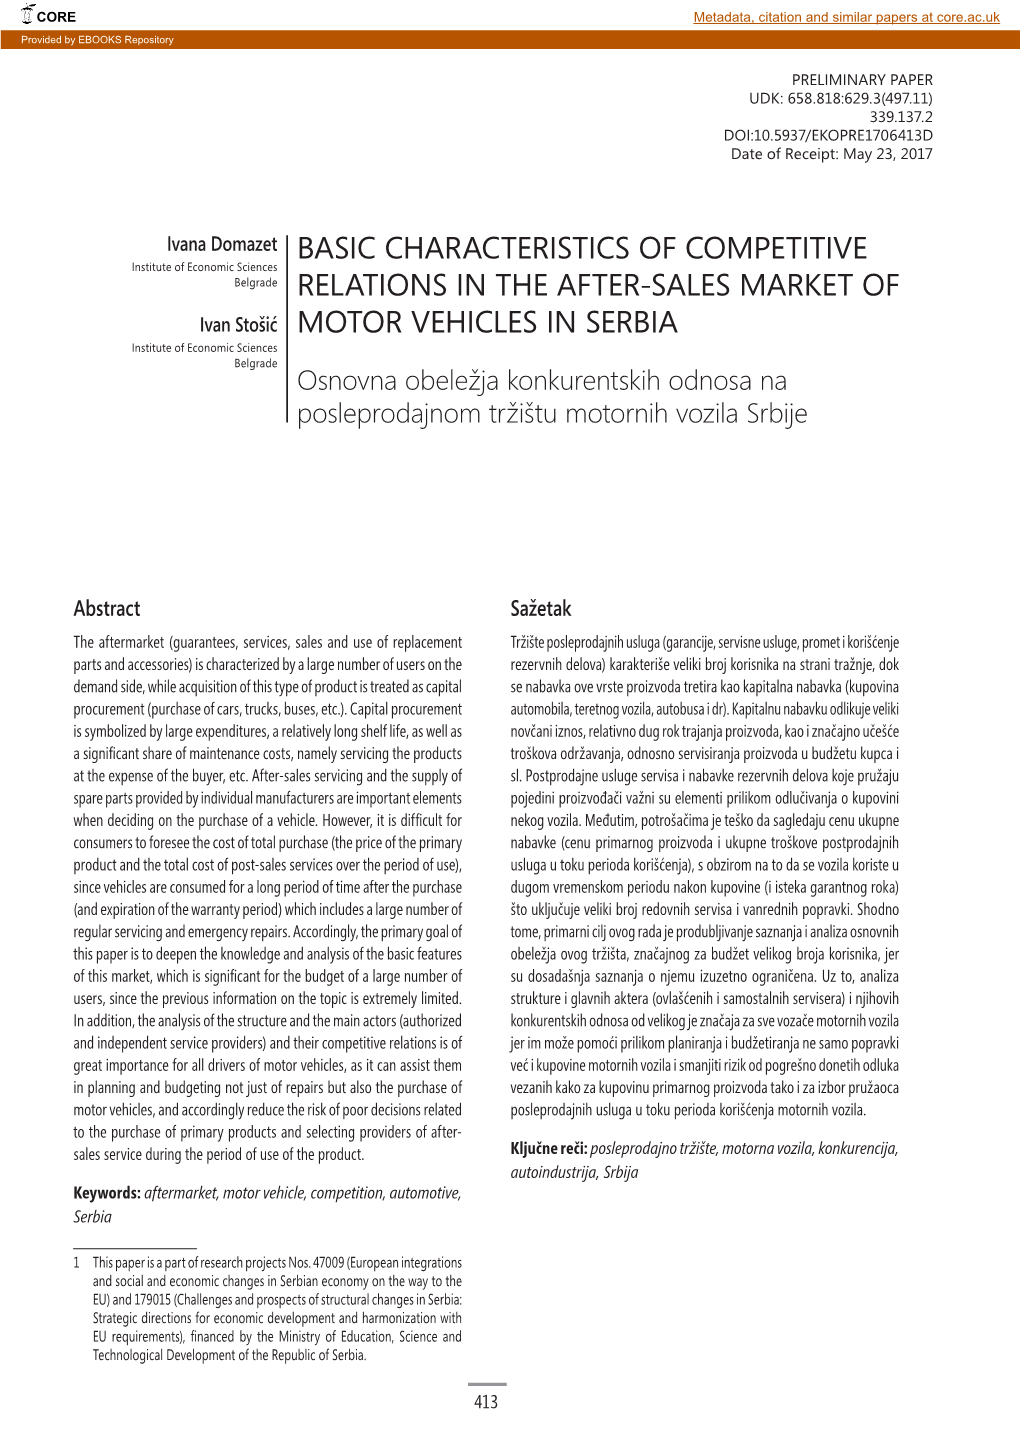 Basic Characteristics of Competitive Relations in The